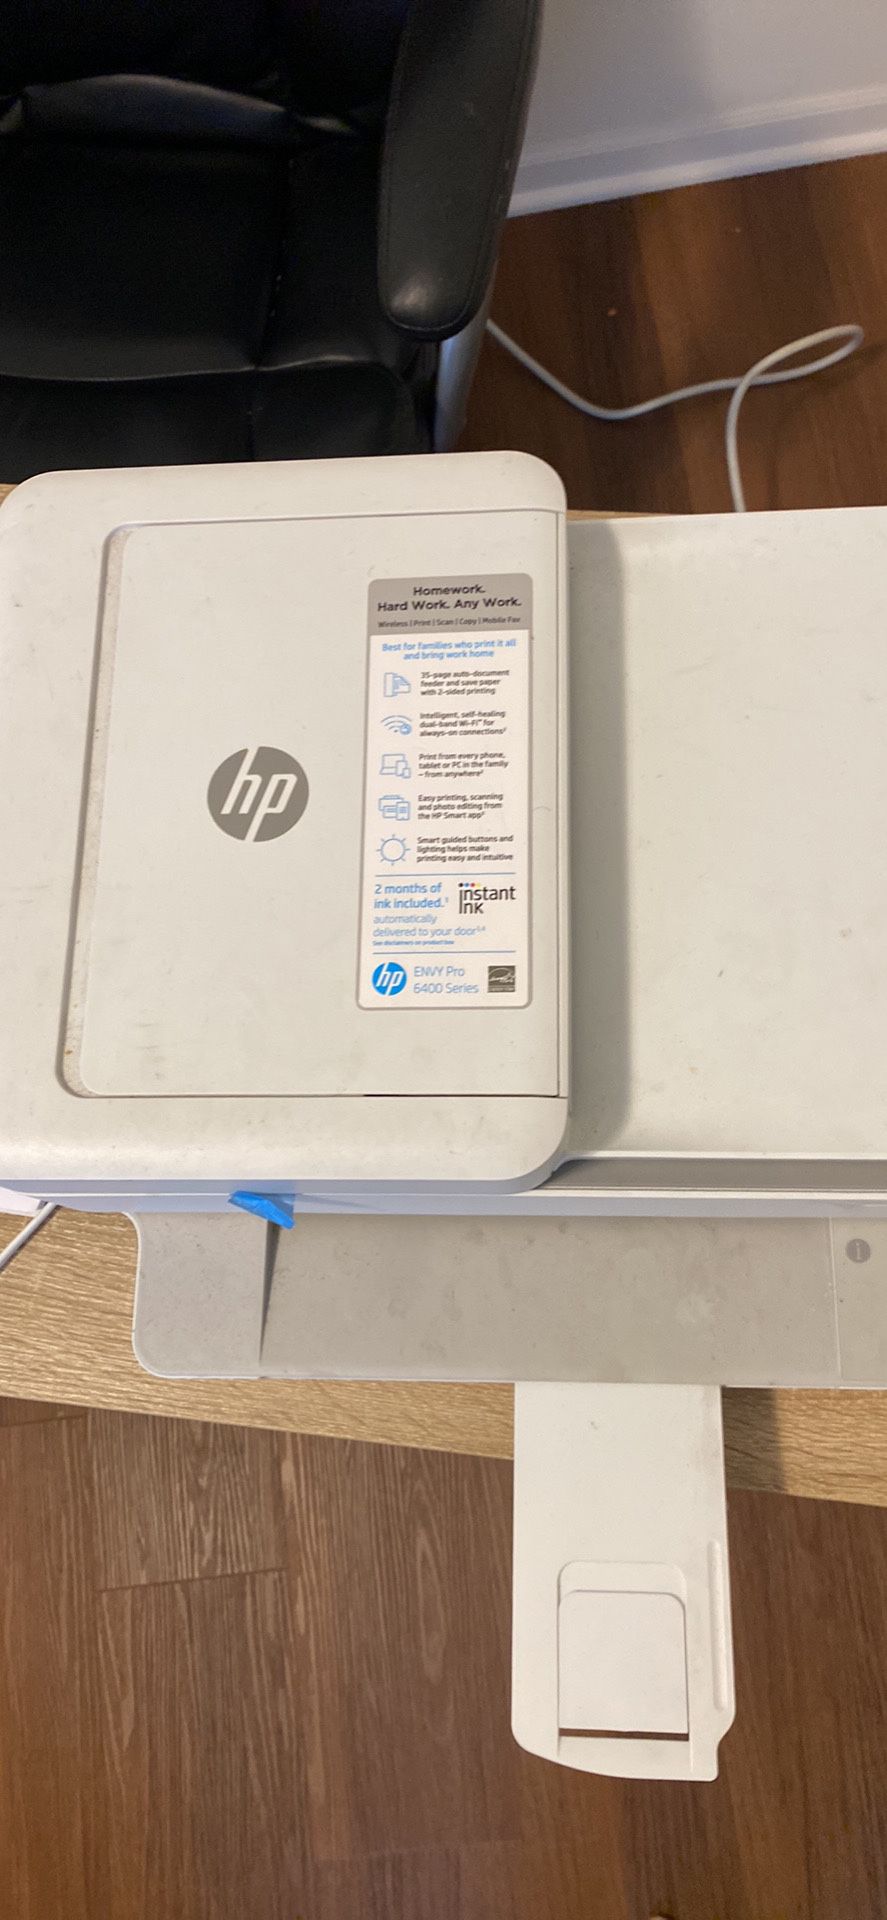 HP ENVY Pro 6400 All-in-One Printer series